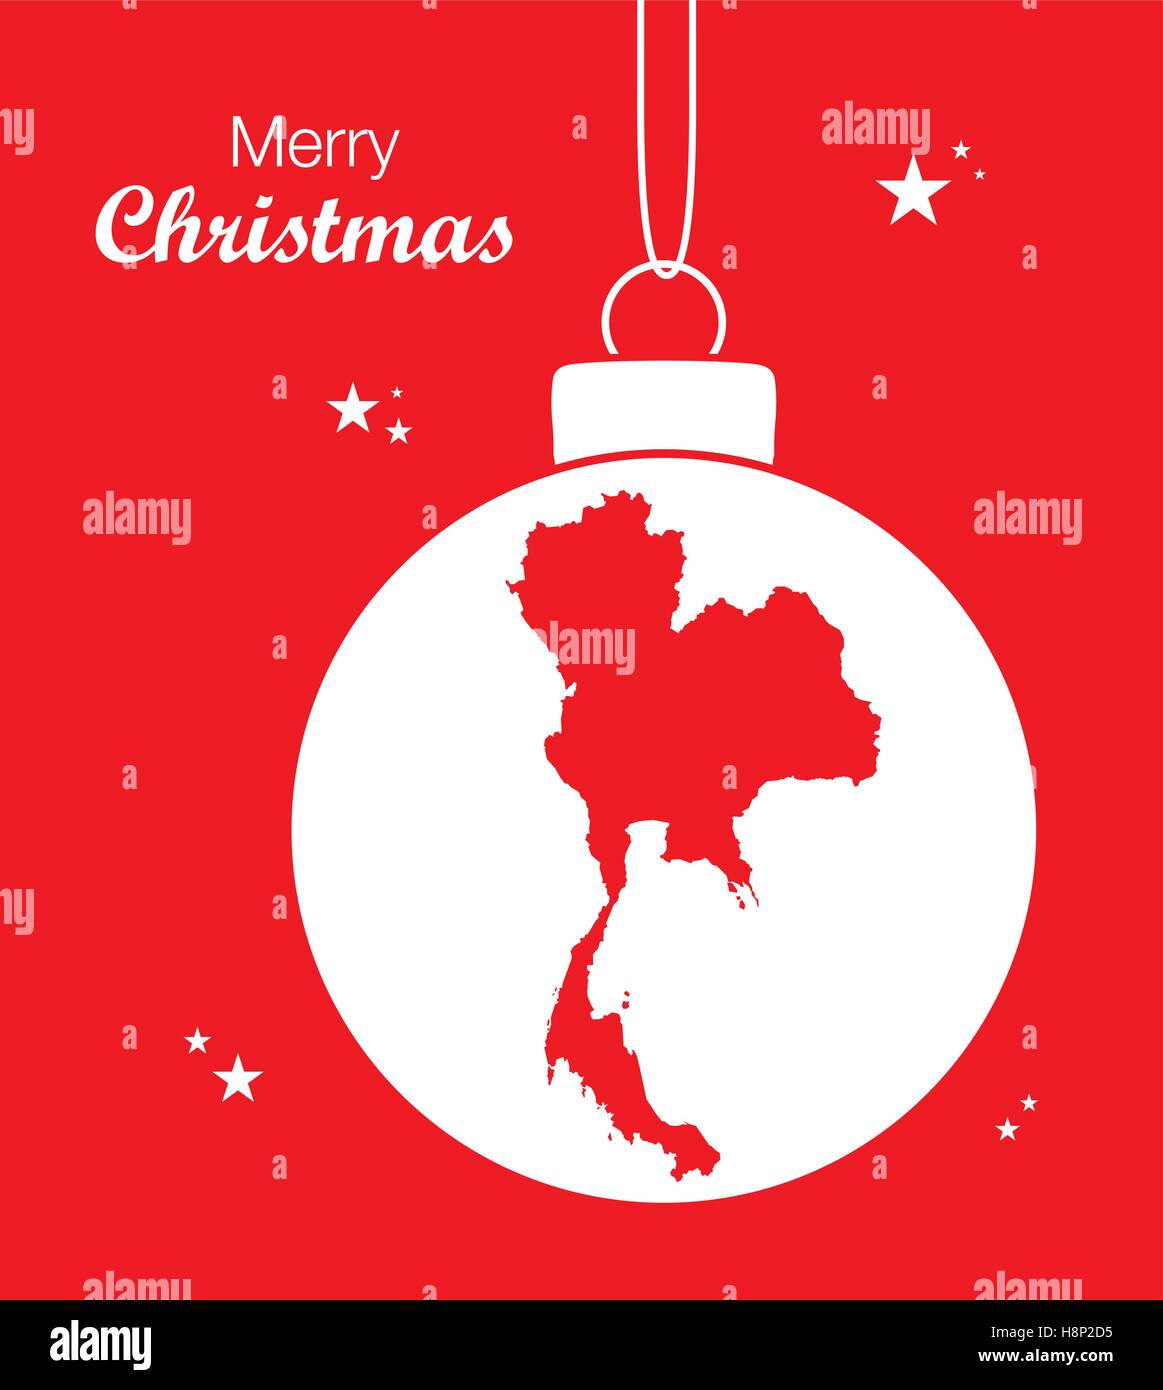 Merry Christmas illustration theme with map of Thailand Stock Vector